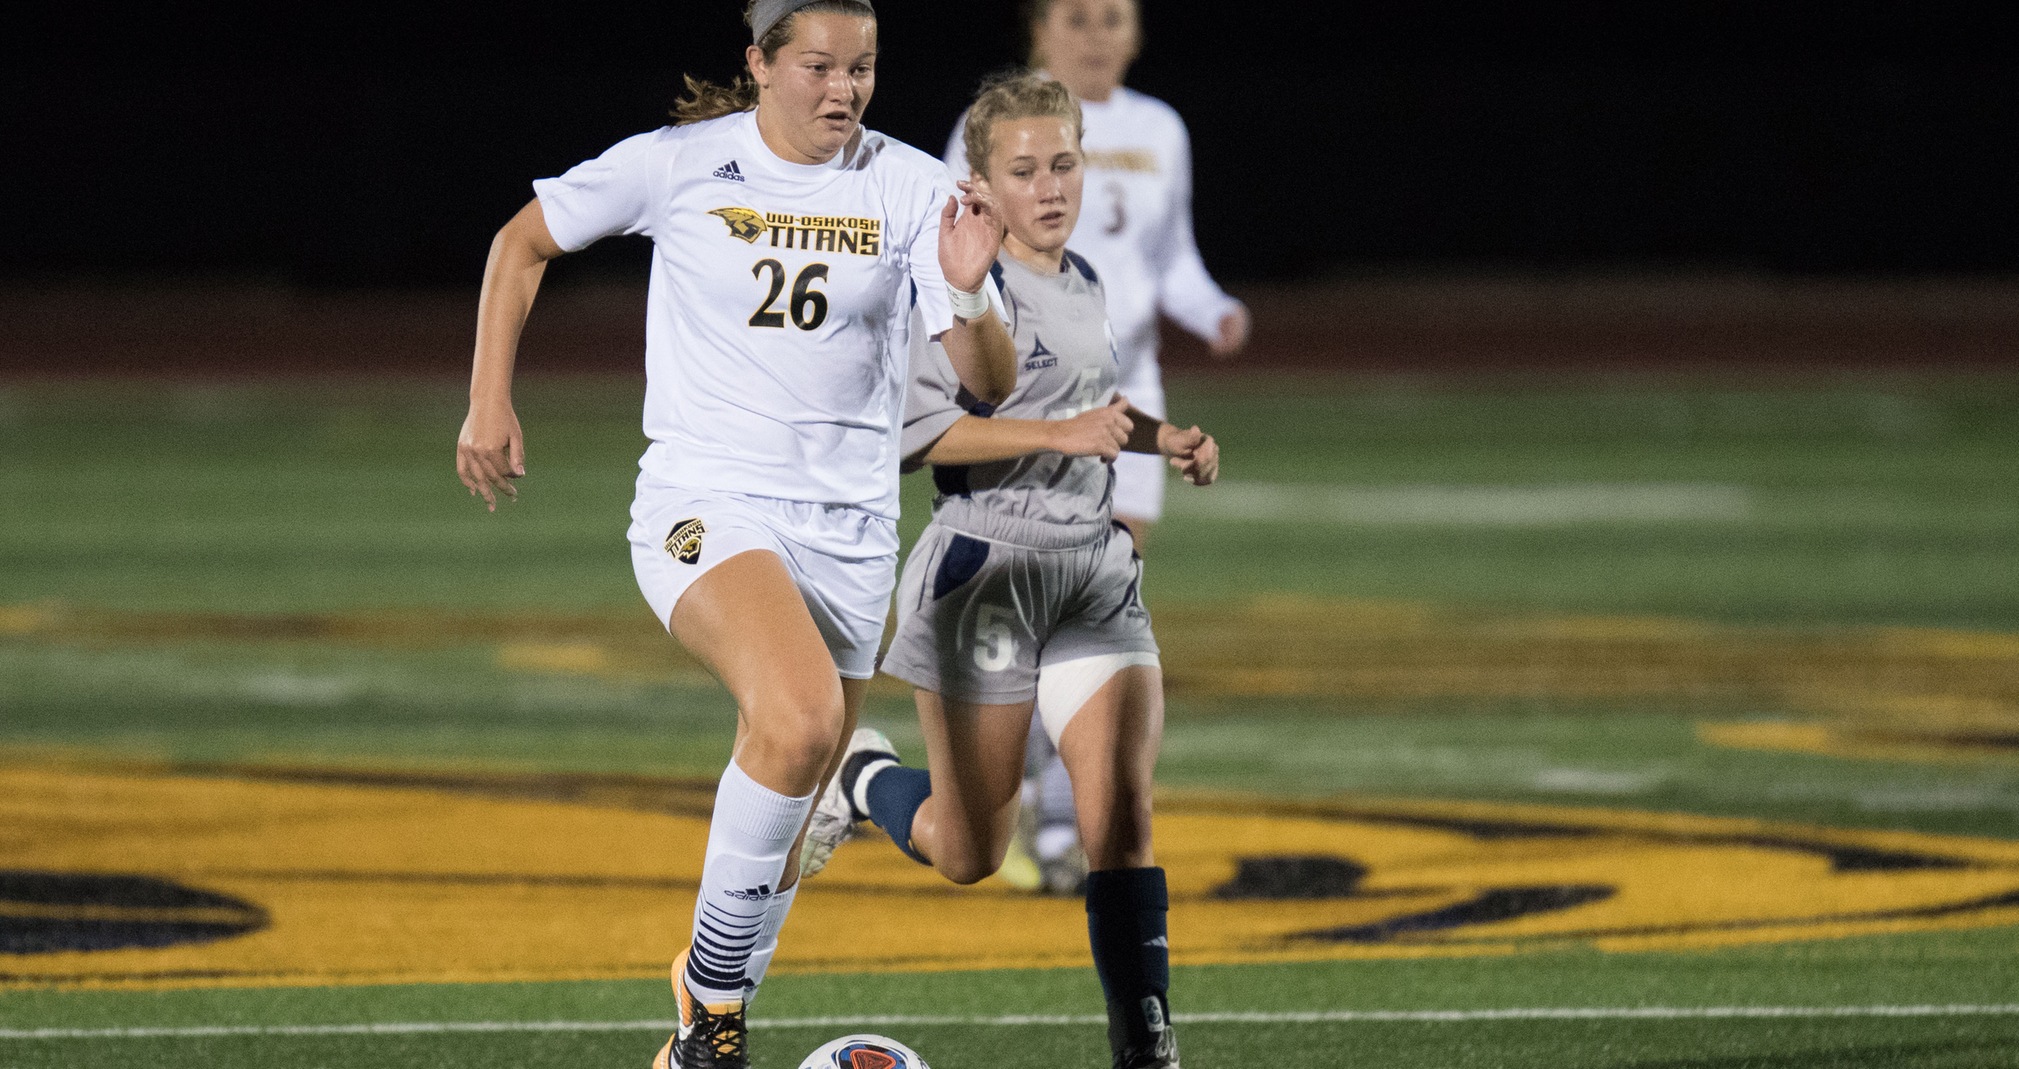 Maddie Morris scored one goal and assisted on another during the Titans' victory over Lawrence University.